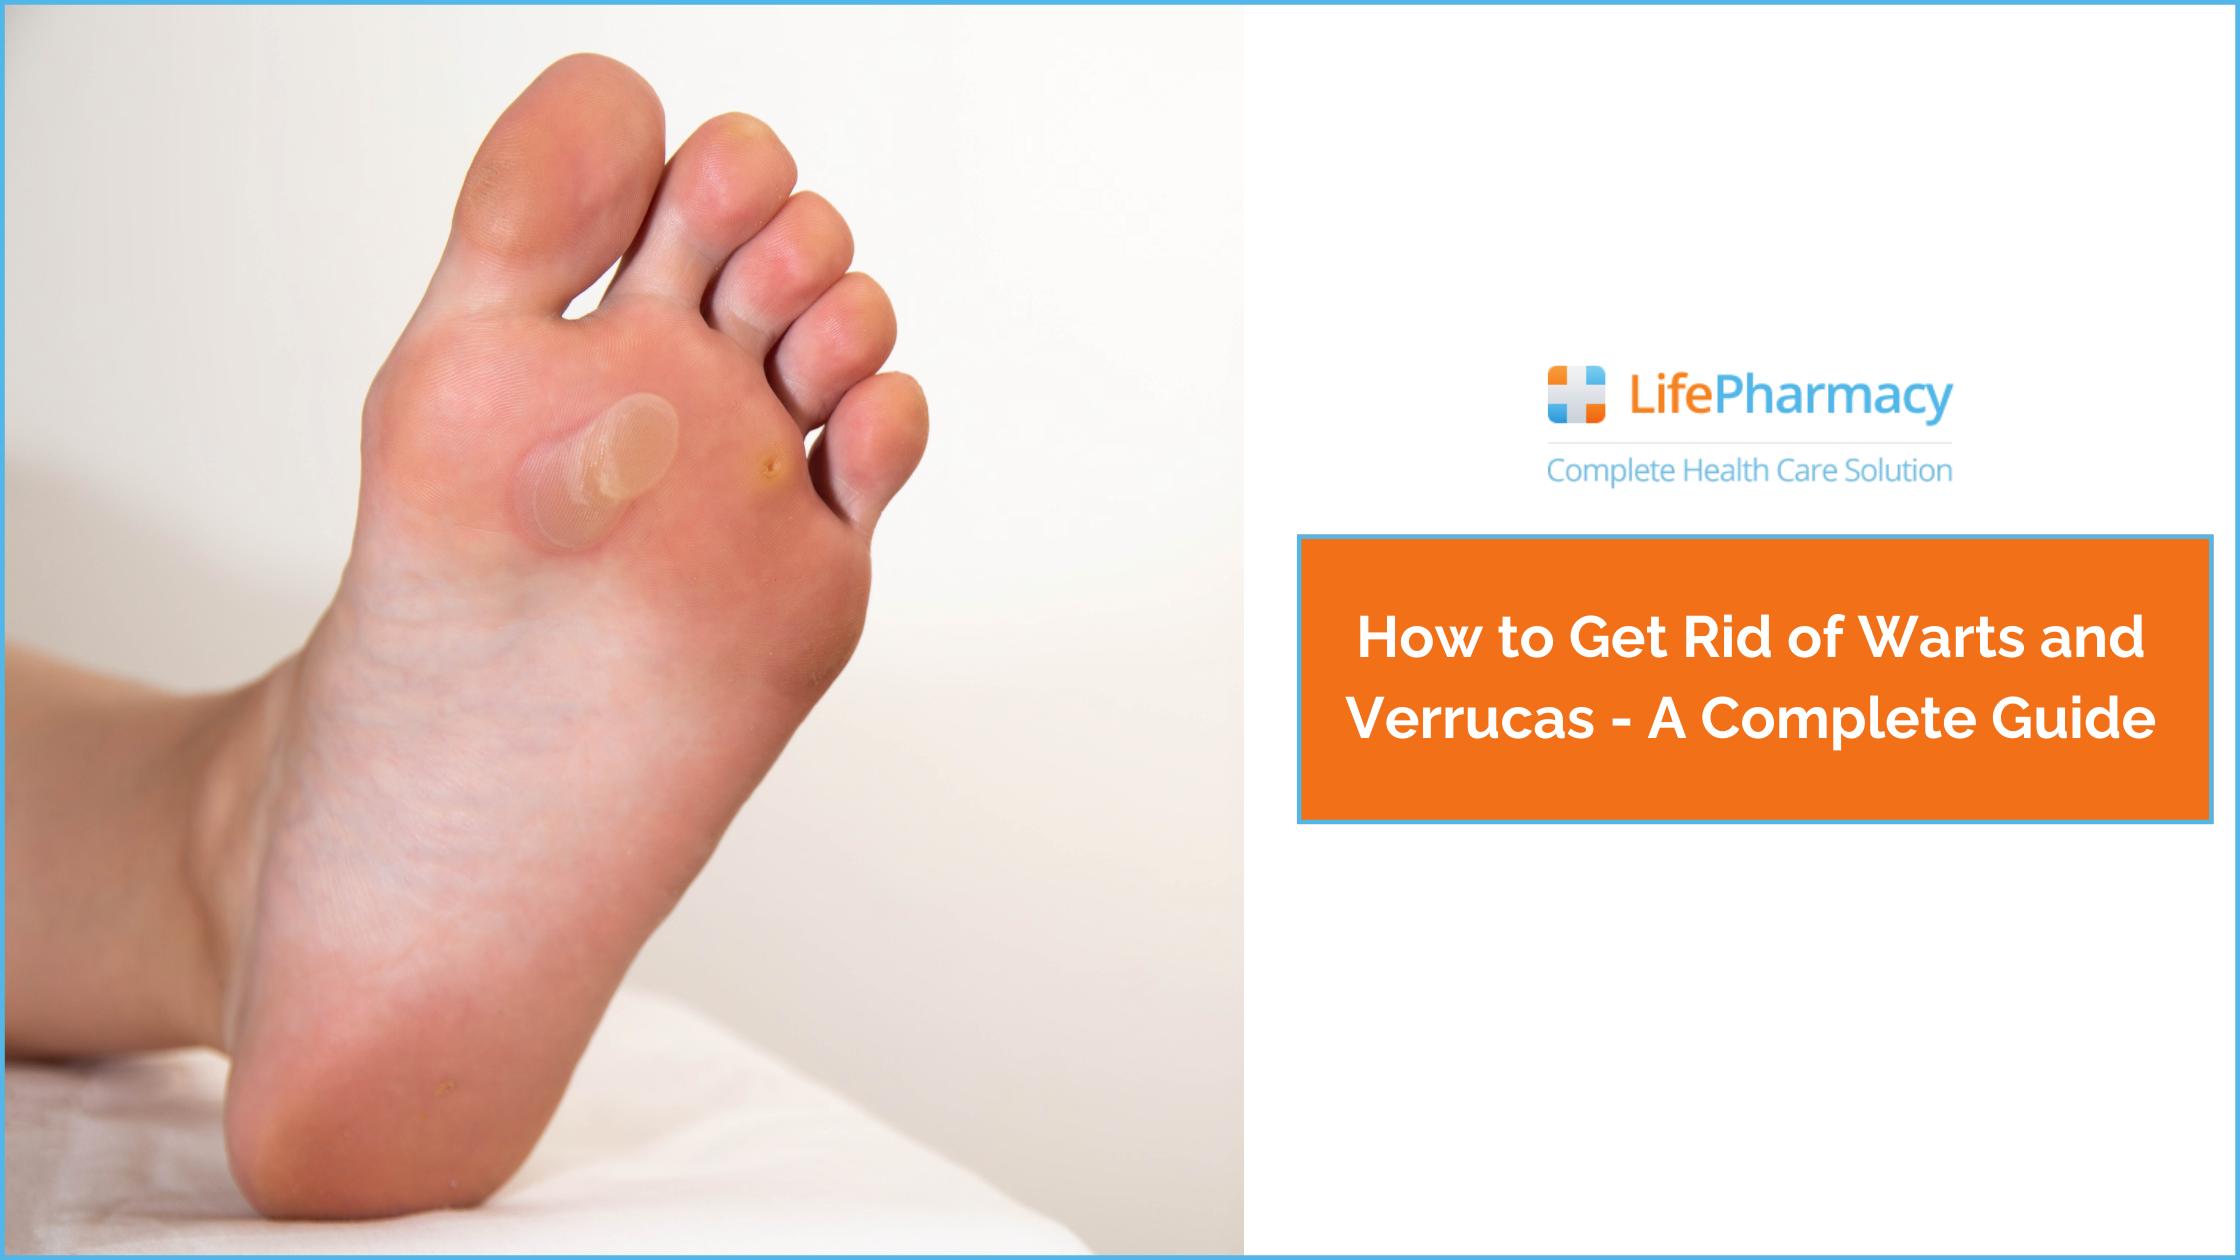 How to Get Rid of Warts and Verrucas - A Complete Guide